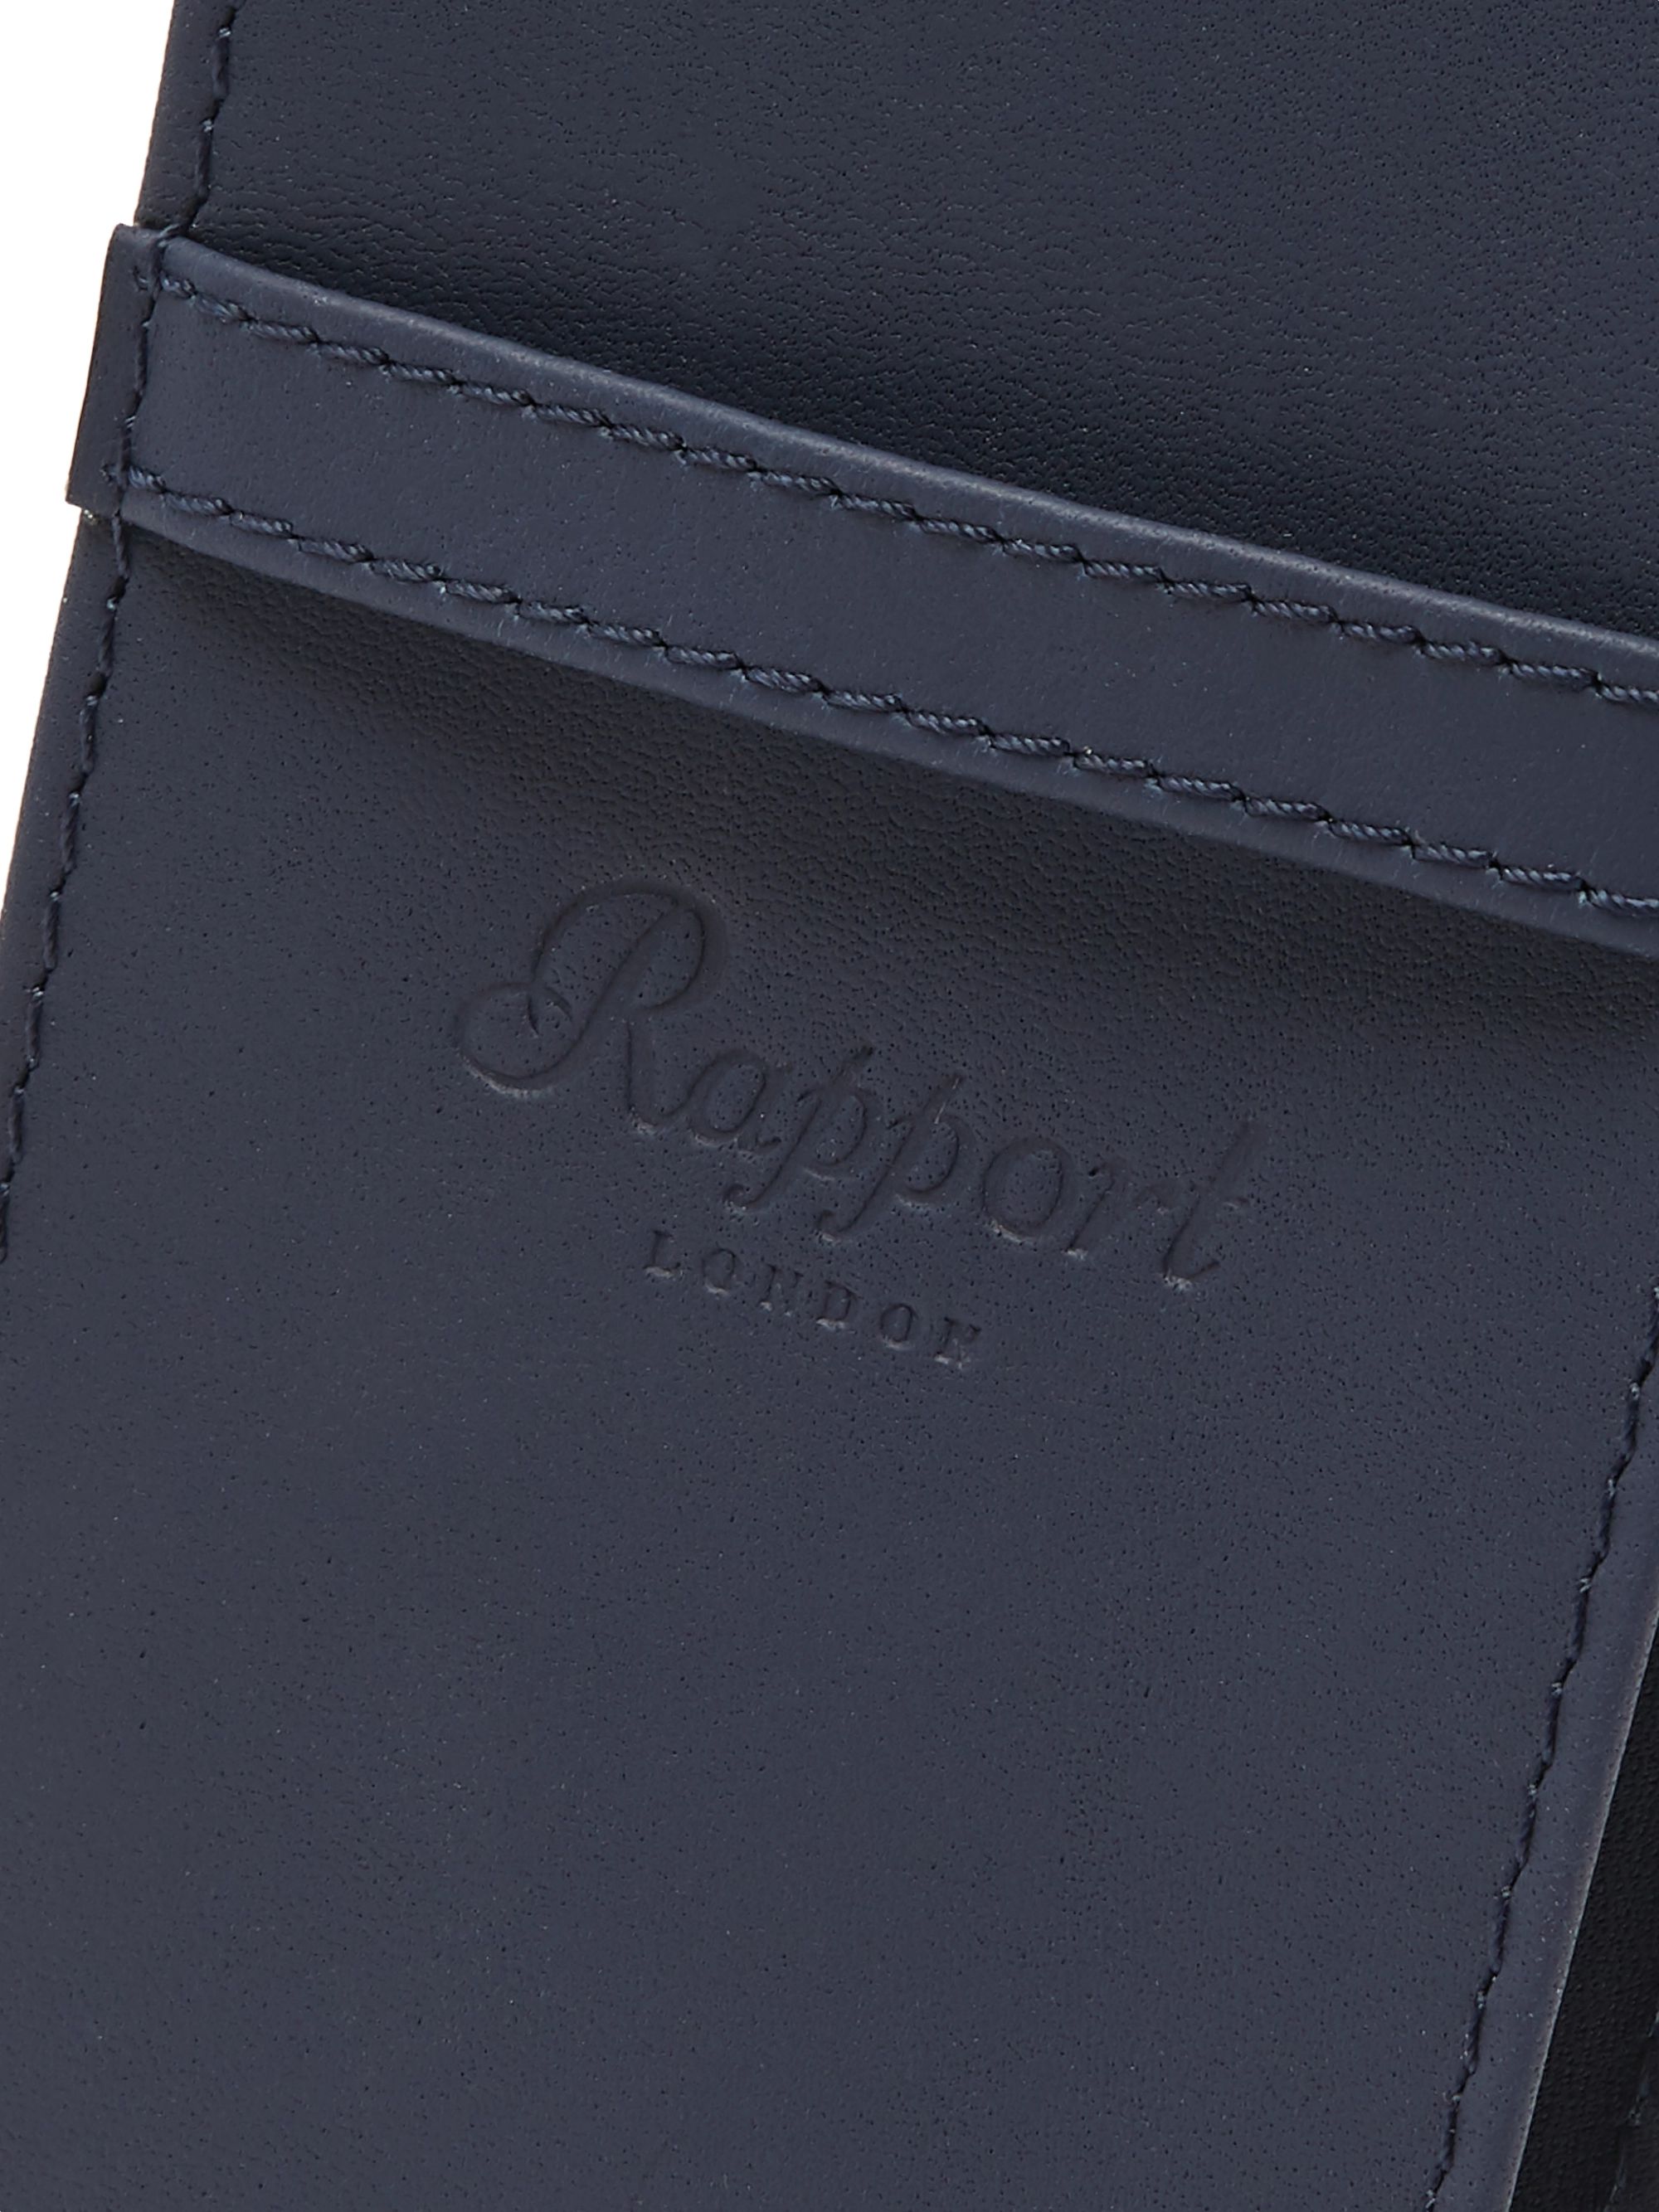 RAPPORT LONDON Hyde Park Leather Watch Pouch